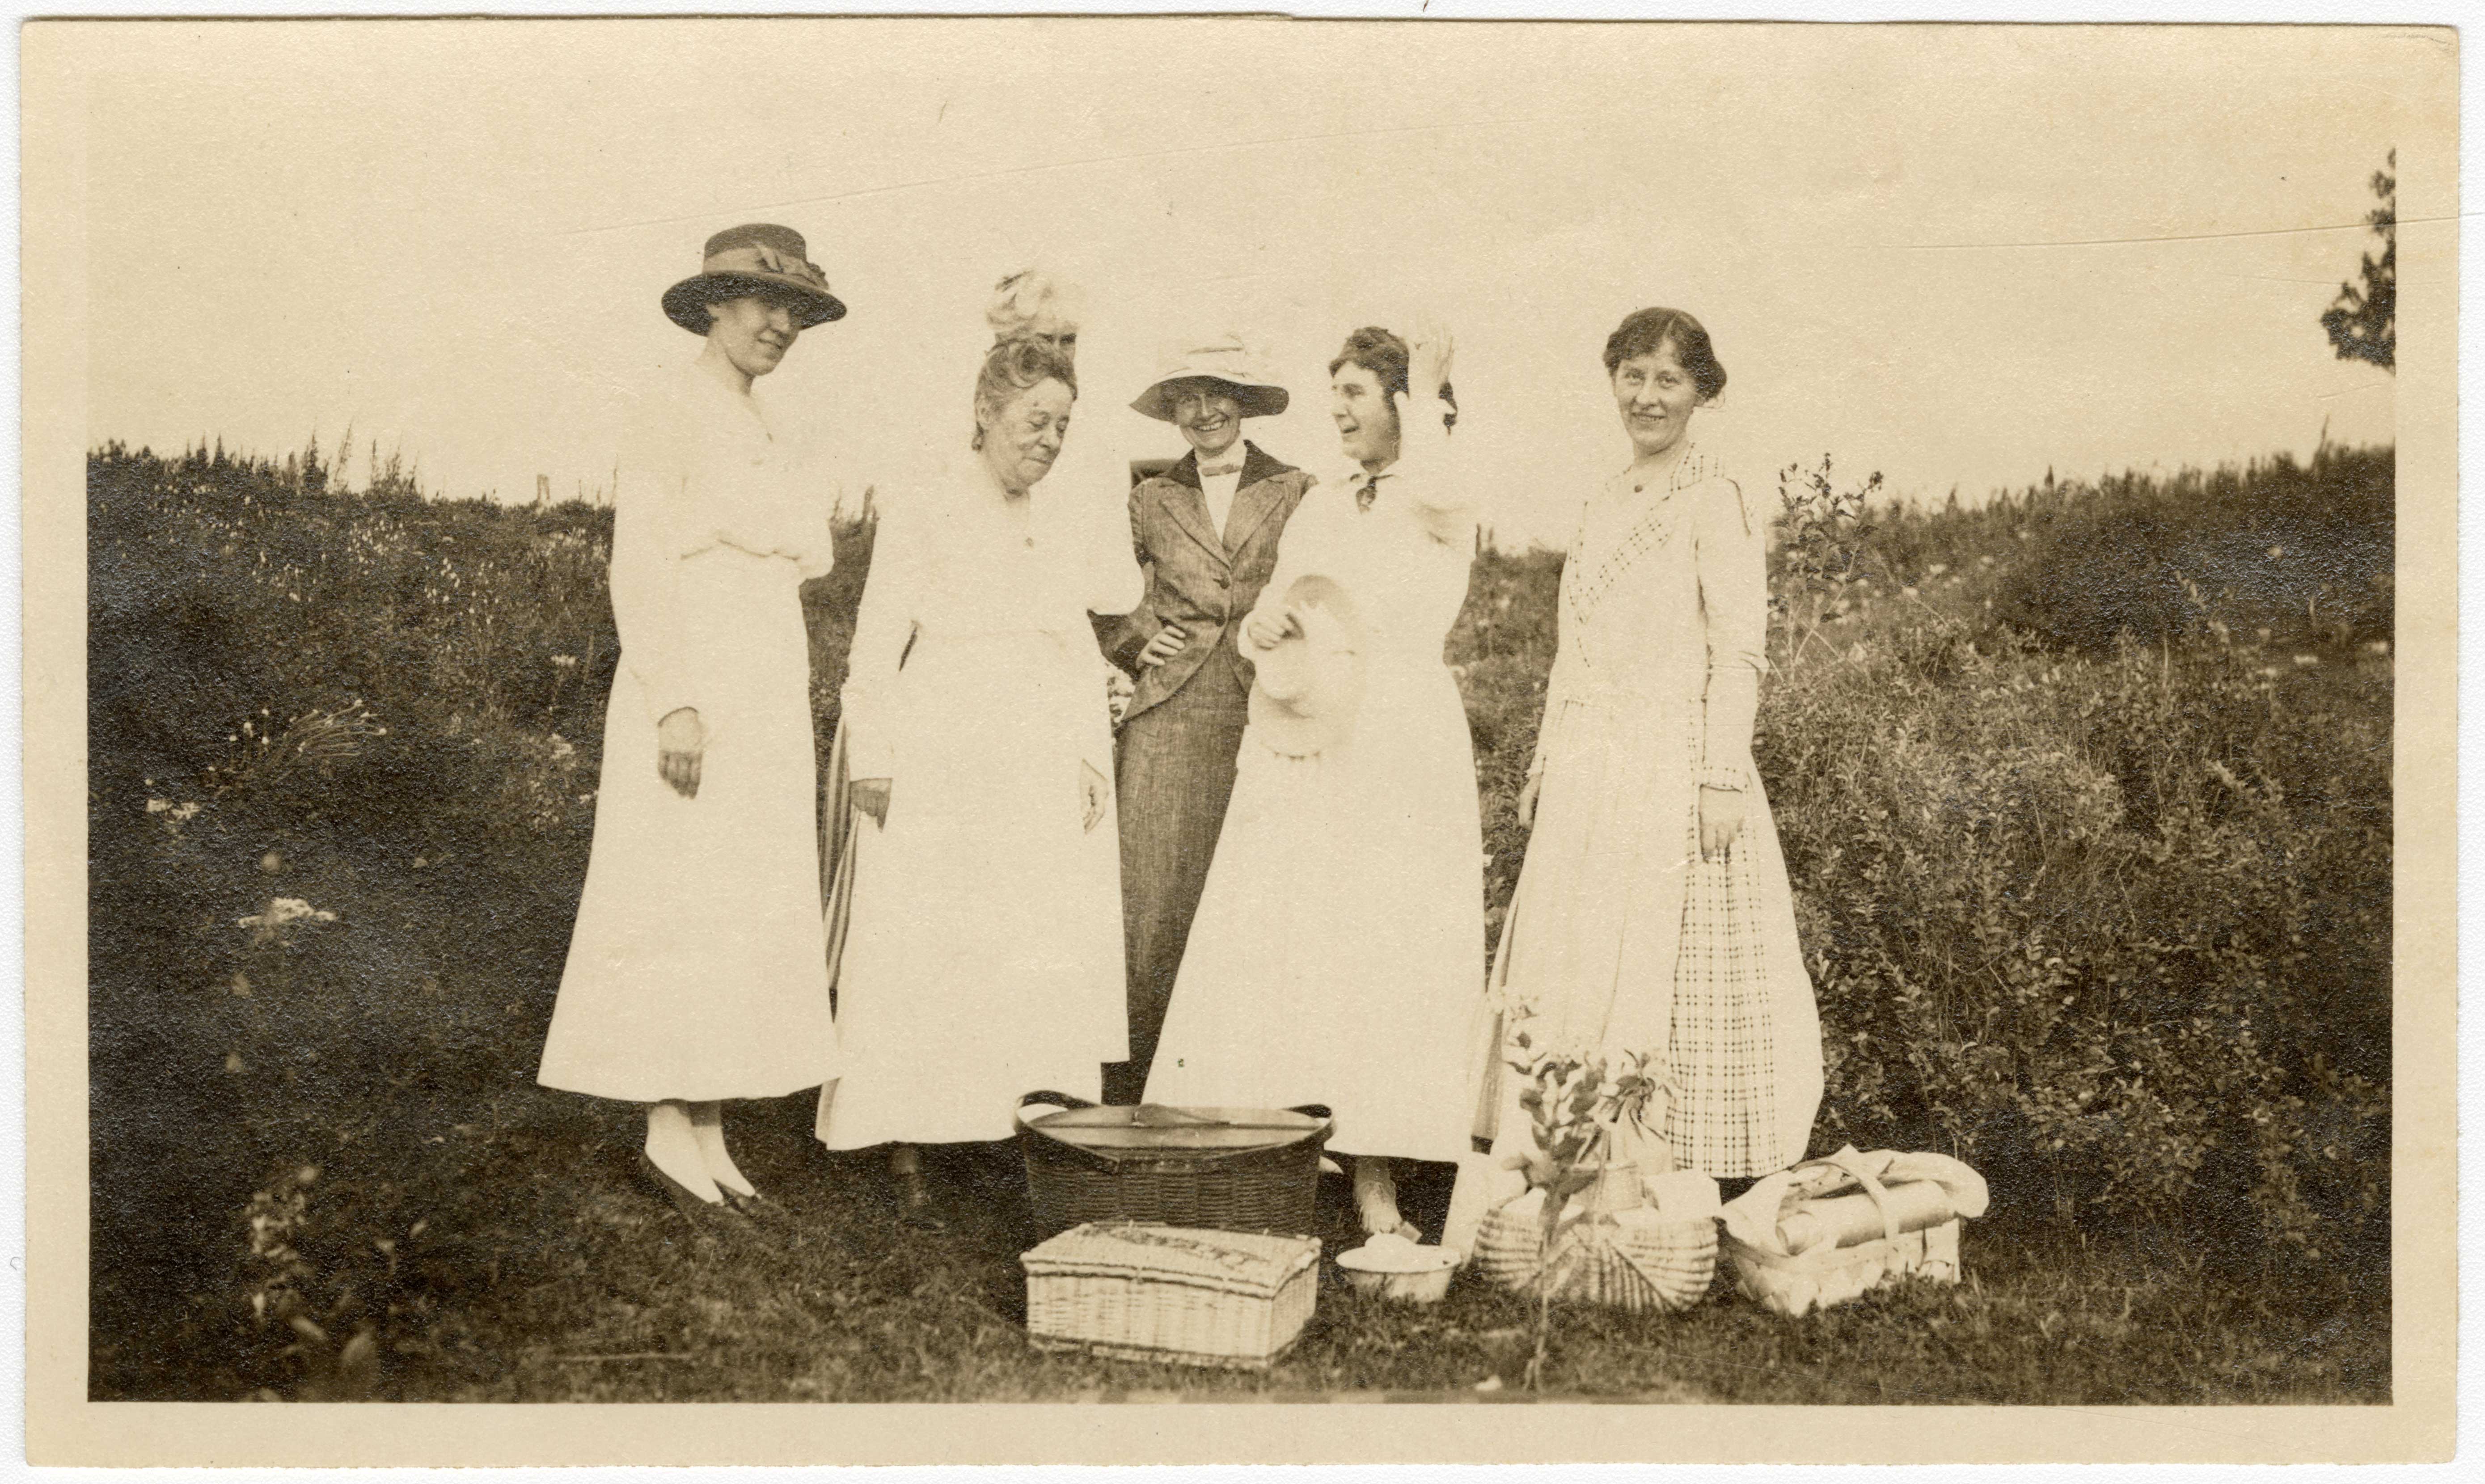 [Isabel B. Hamilton in old age, on a picnic with four other women]